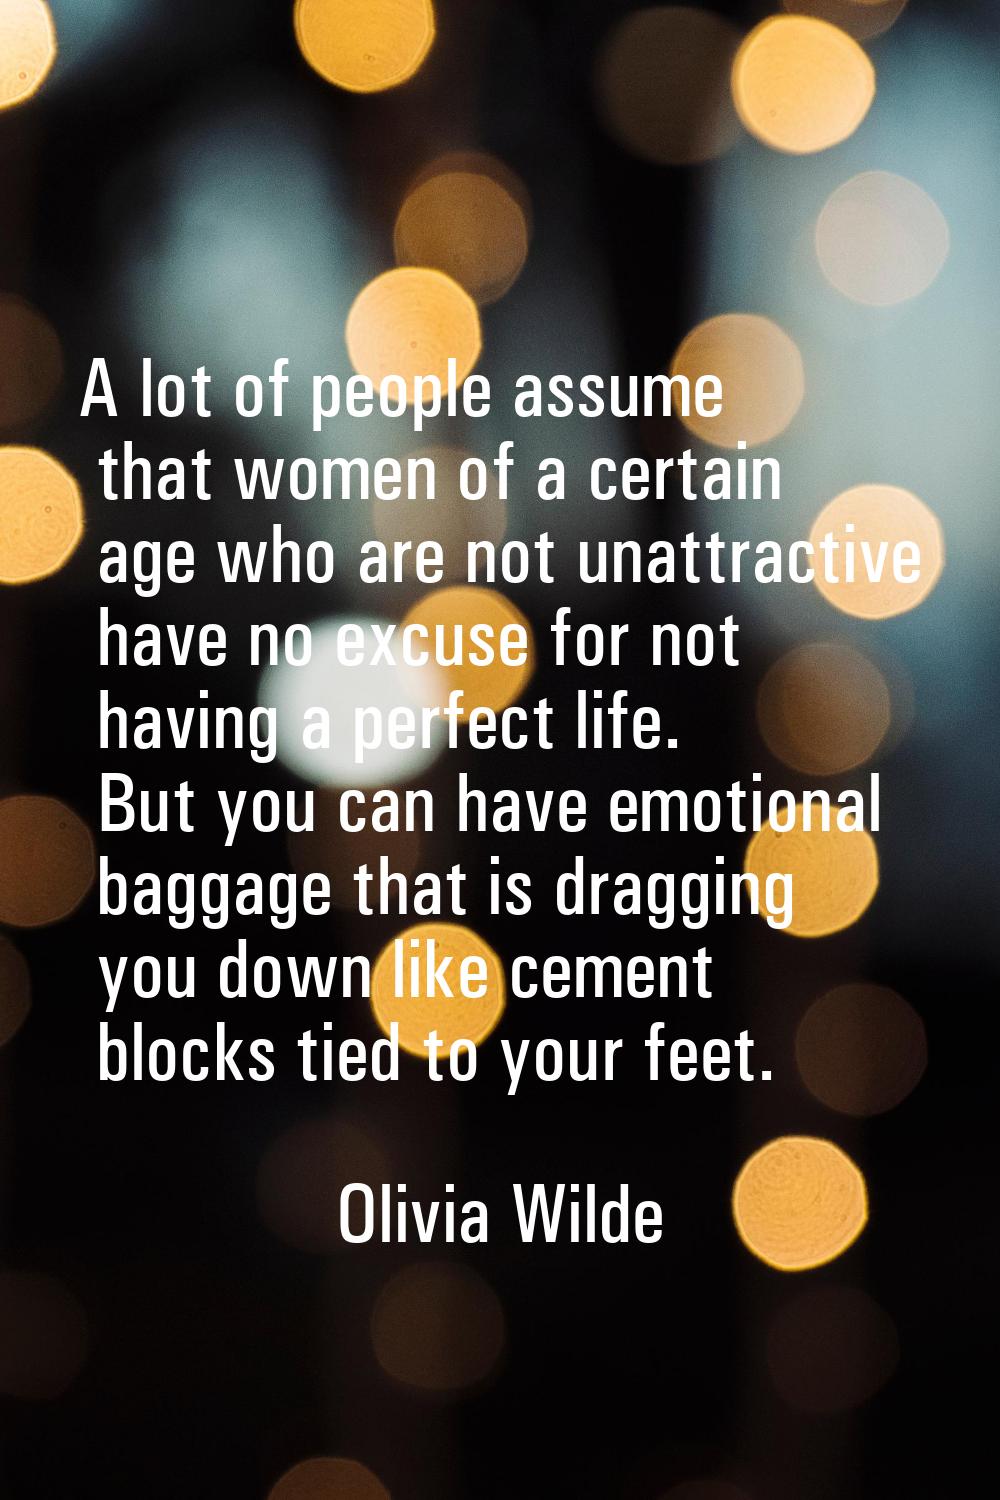 A lot of people assume that women of a certain age who are not unattractive have no excuse for not 